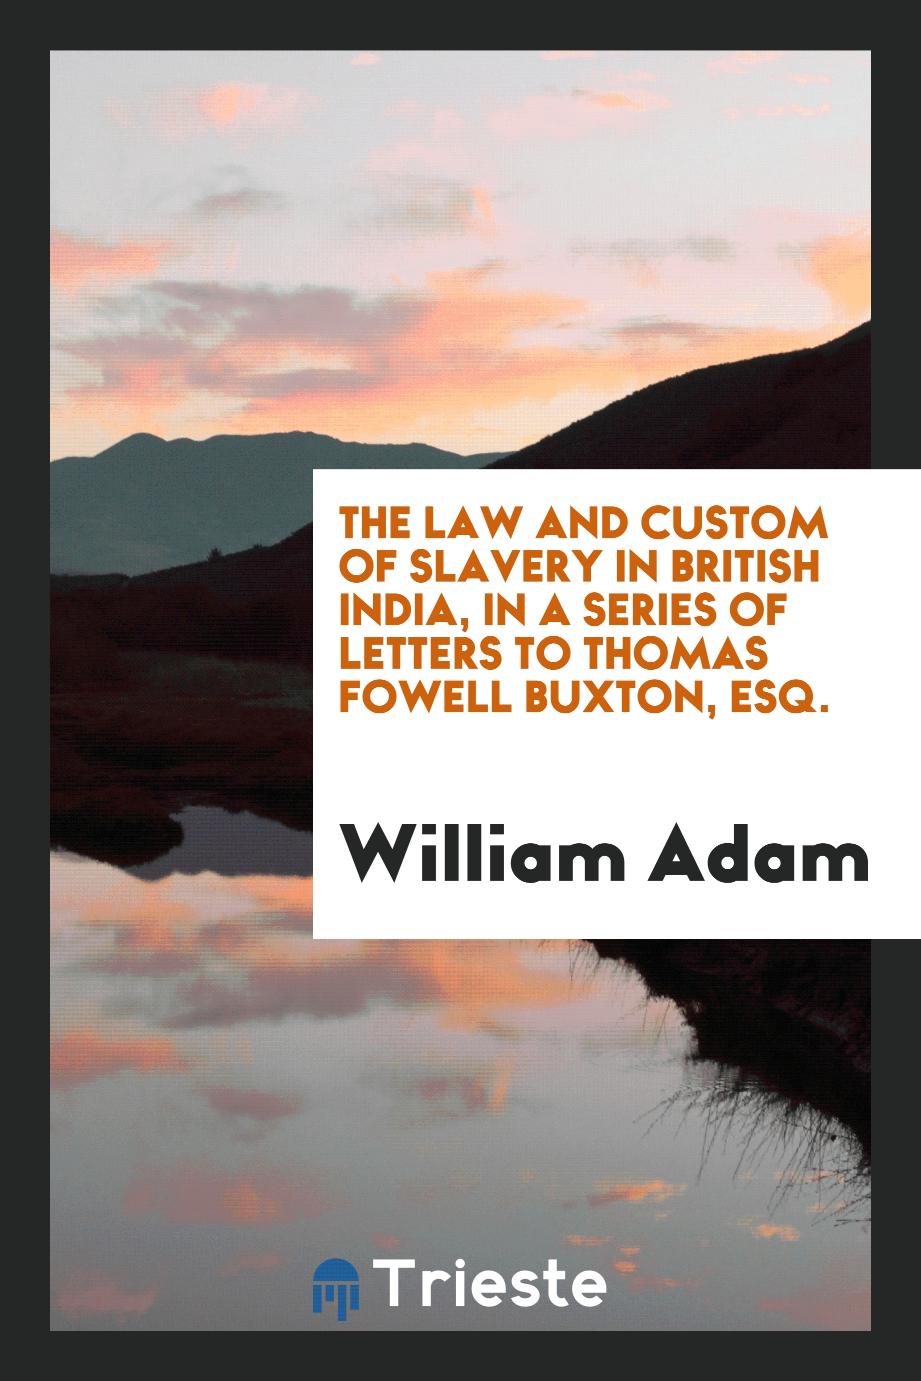 William Adam - The law and custom of slavery in British India, in a series of letters to Thomas Fowell Buxton, esq.